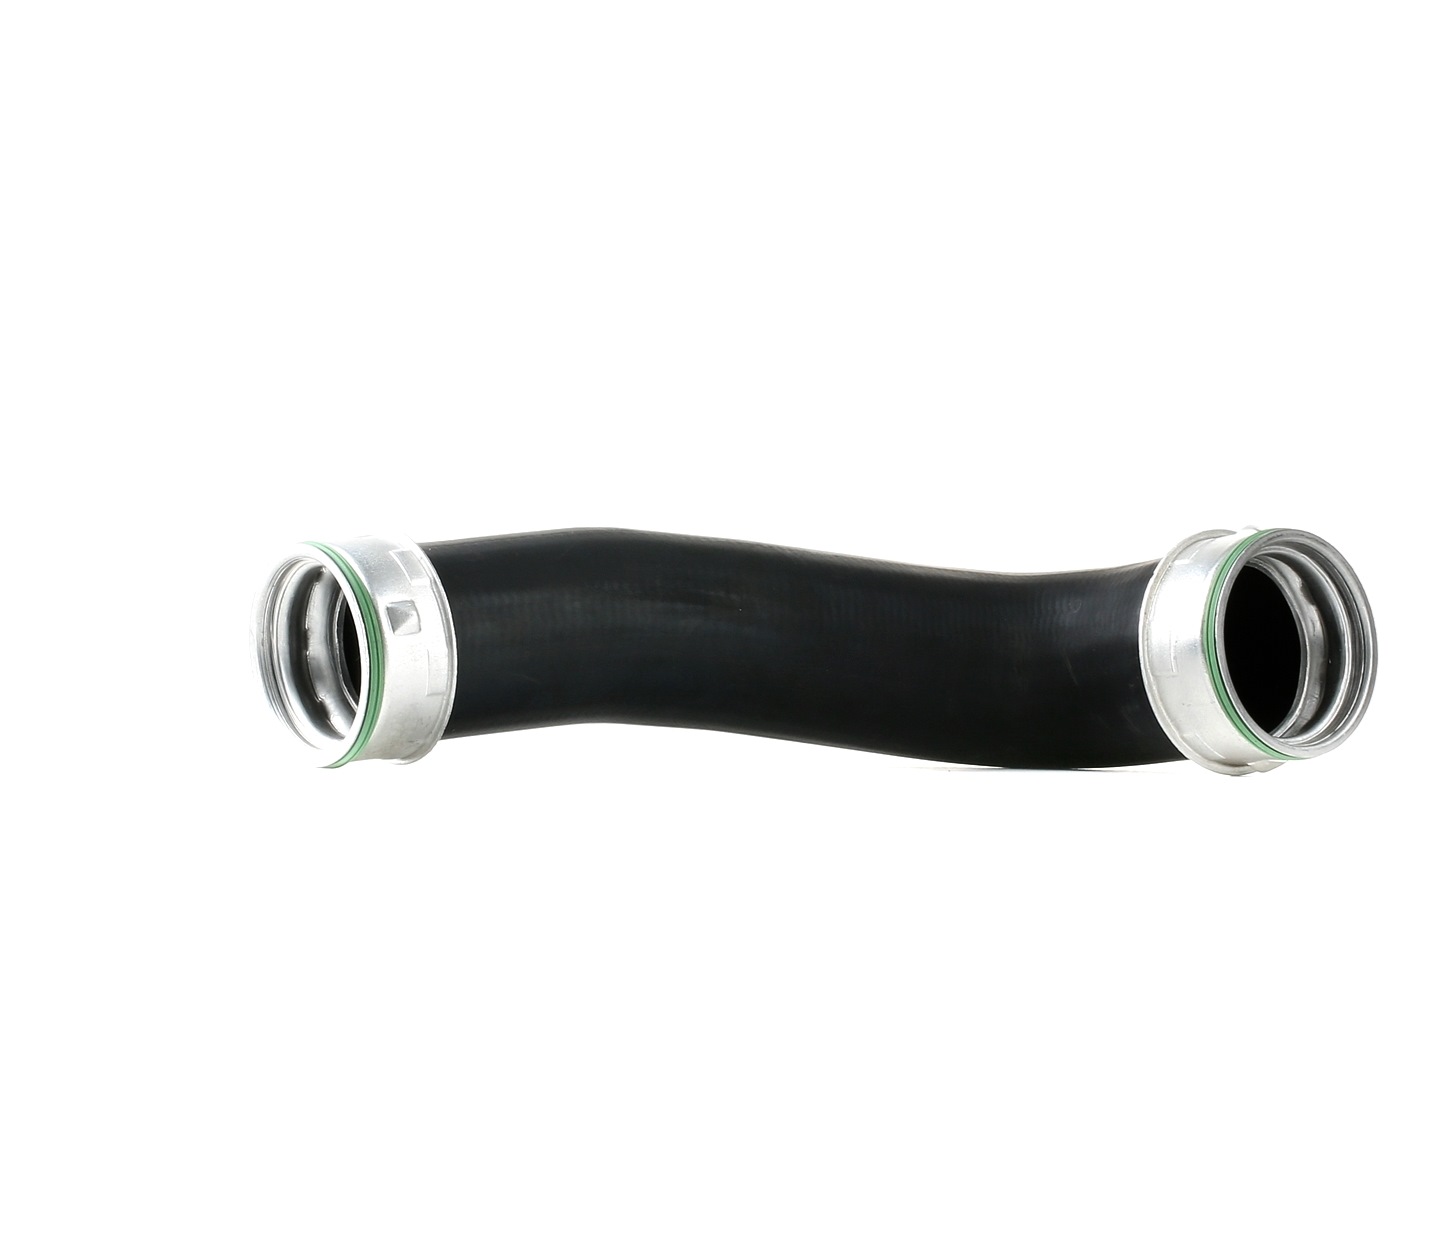 STARK SKCHI-2030006 Charger Intake Hose 69mm, Rubber with fabric lining, with gaskets/seals